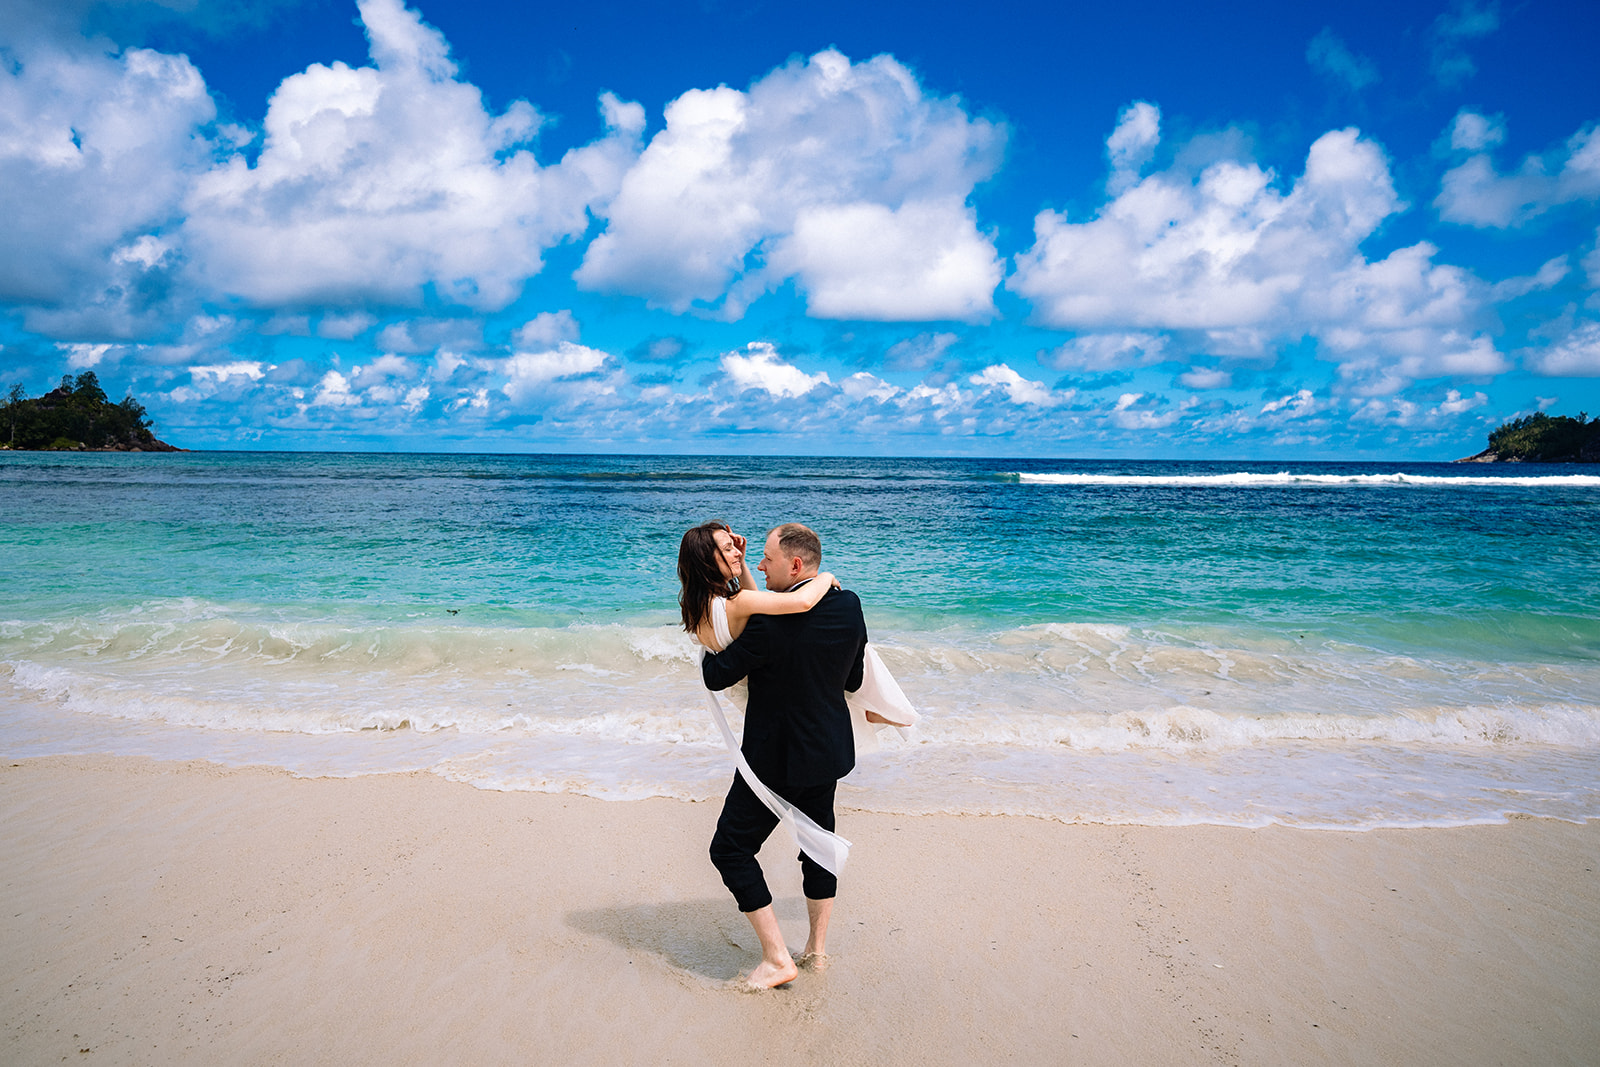 Photography of a wedding in Seychelles on Baie Lazare beach